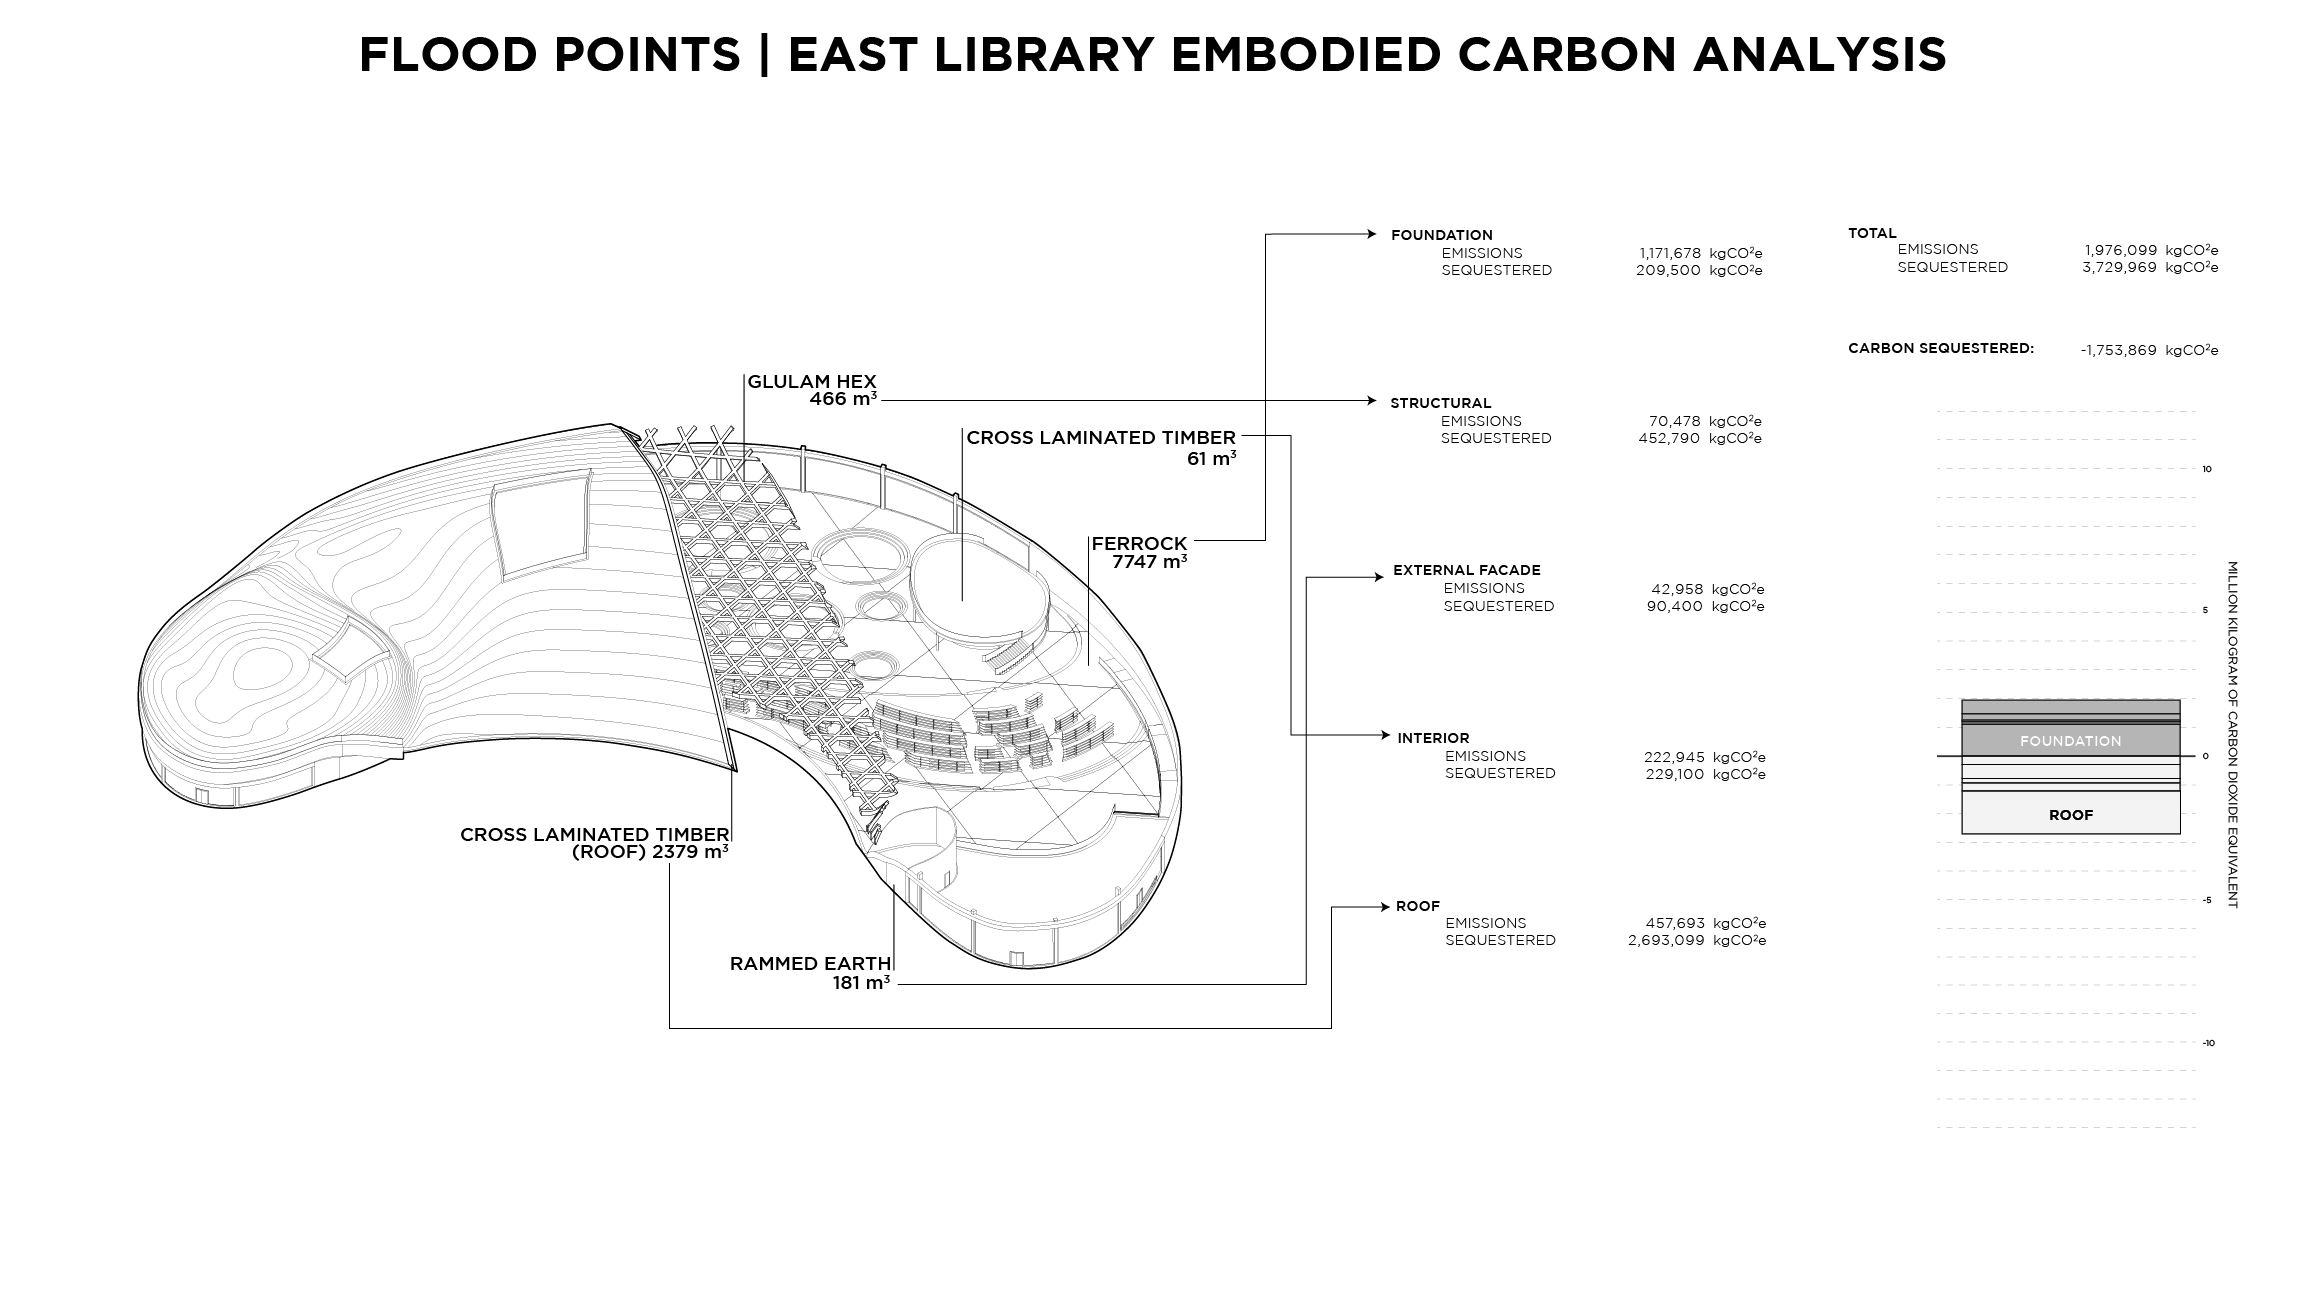 FLOODPOINTS_East Library Embodied Carbon Analysis.png